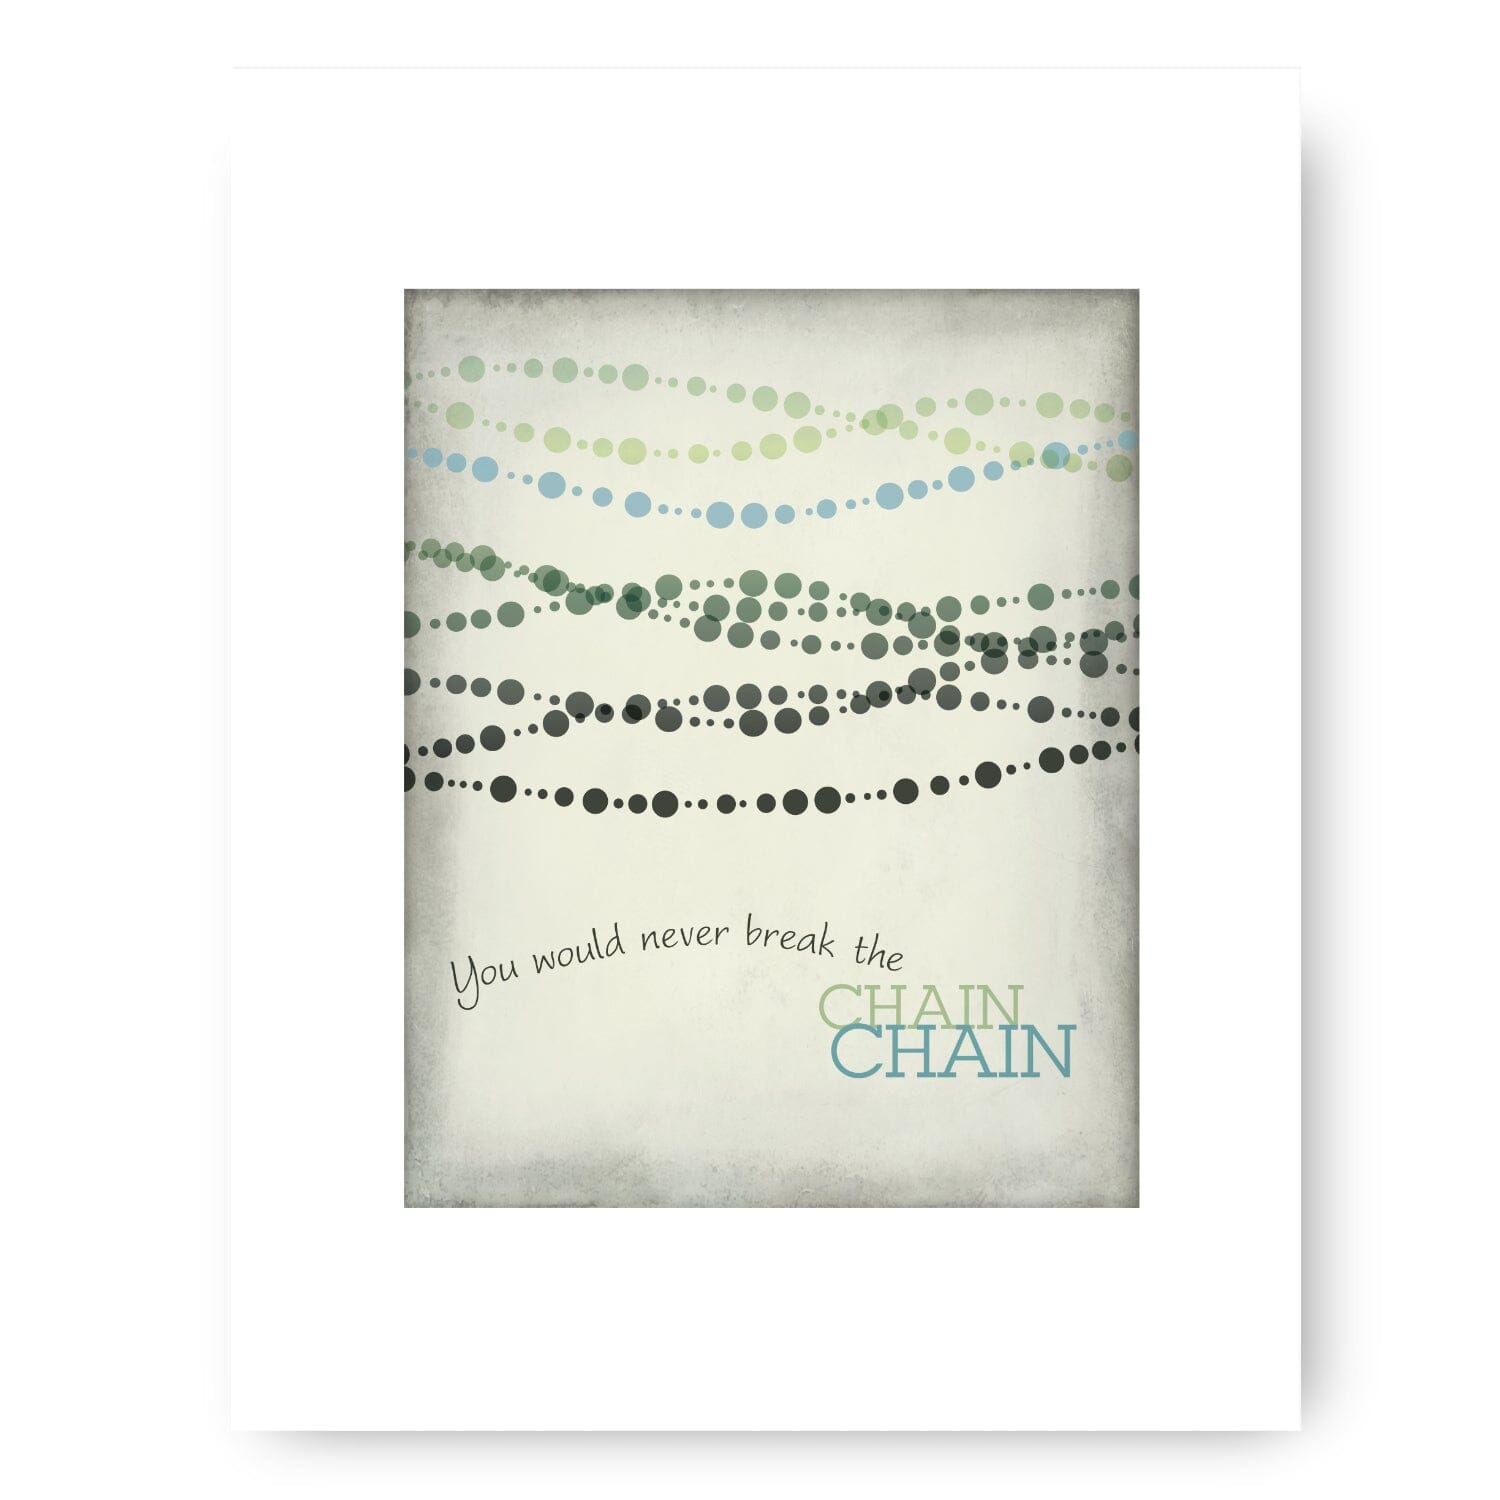 The Chain by Fleetwood Mac - Rock Music Song Lyric Print Song Lyrics Art Song Lyrics Art 8x10 White Matted Print 